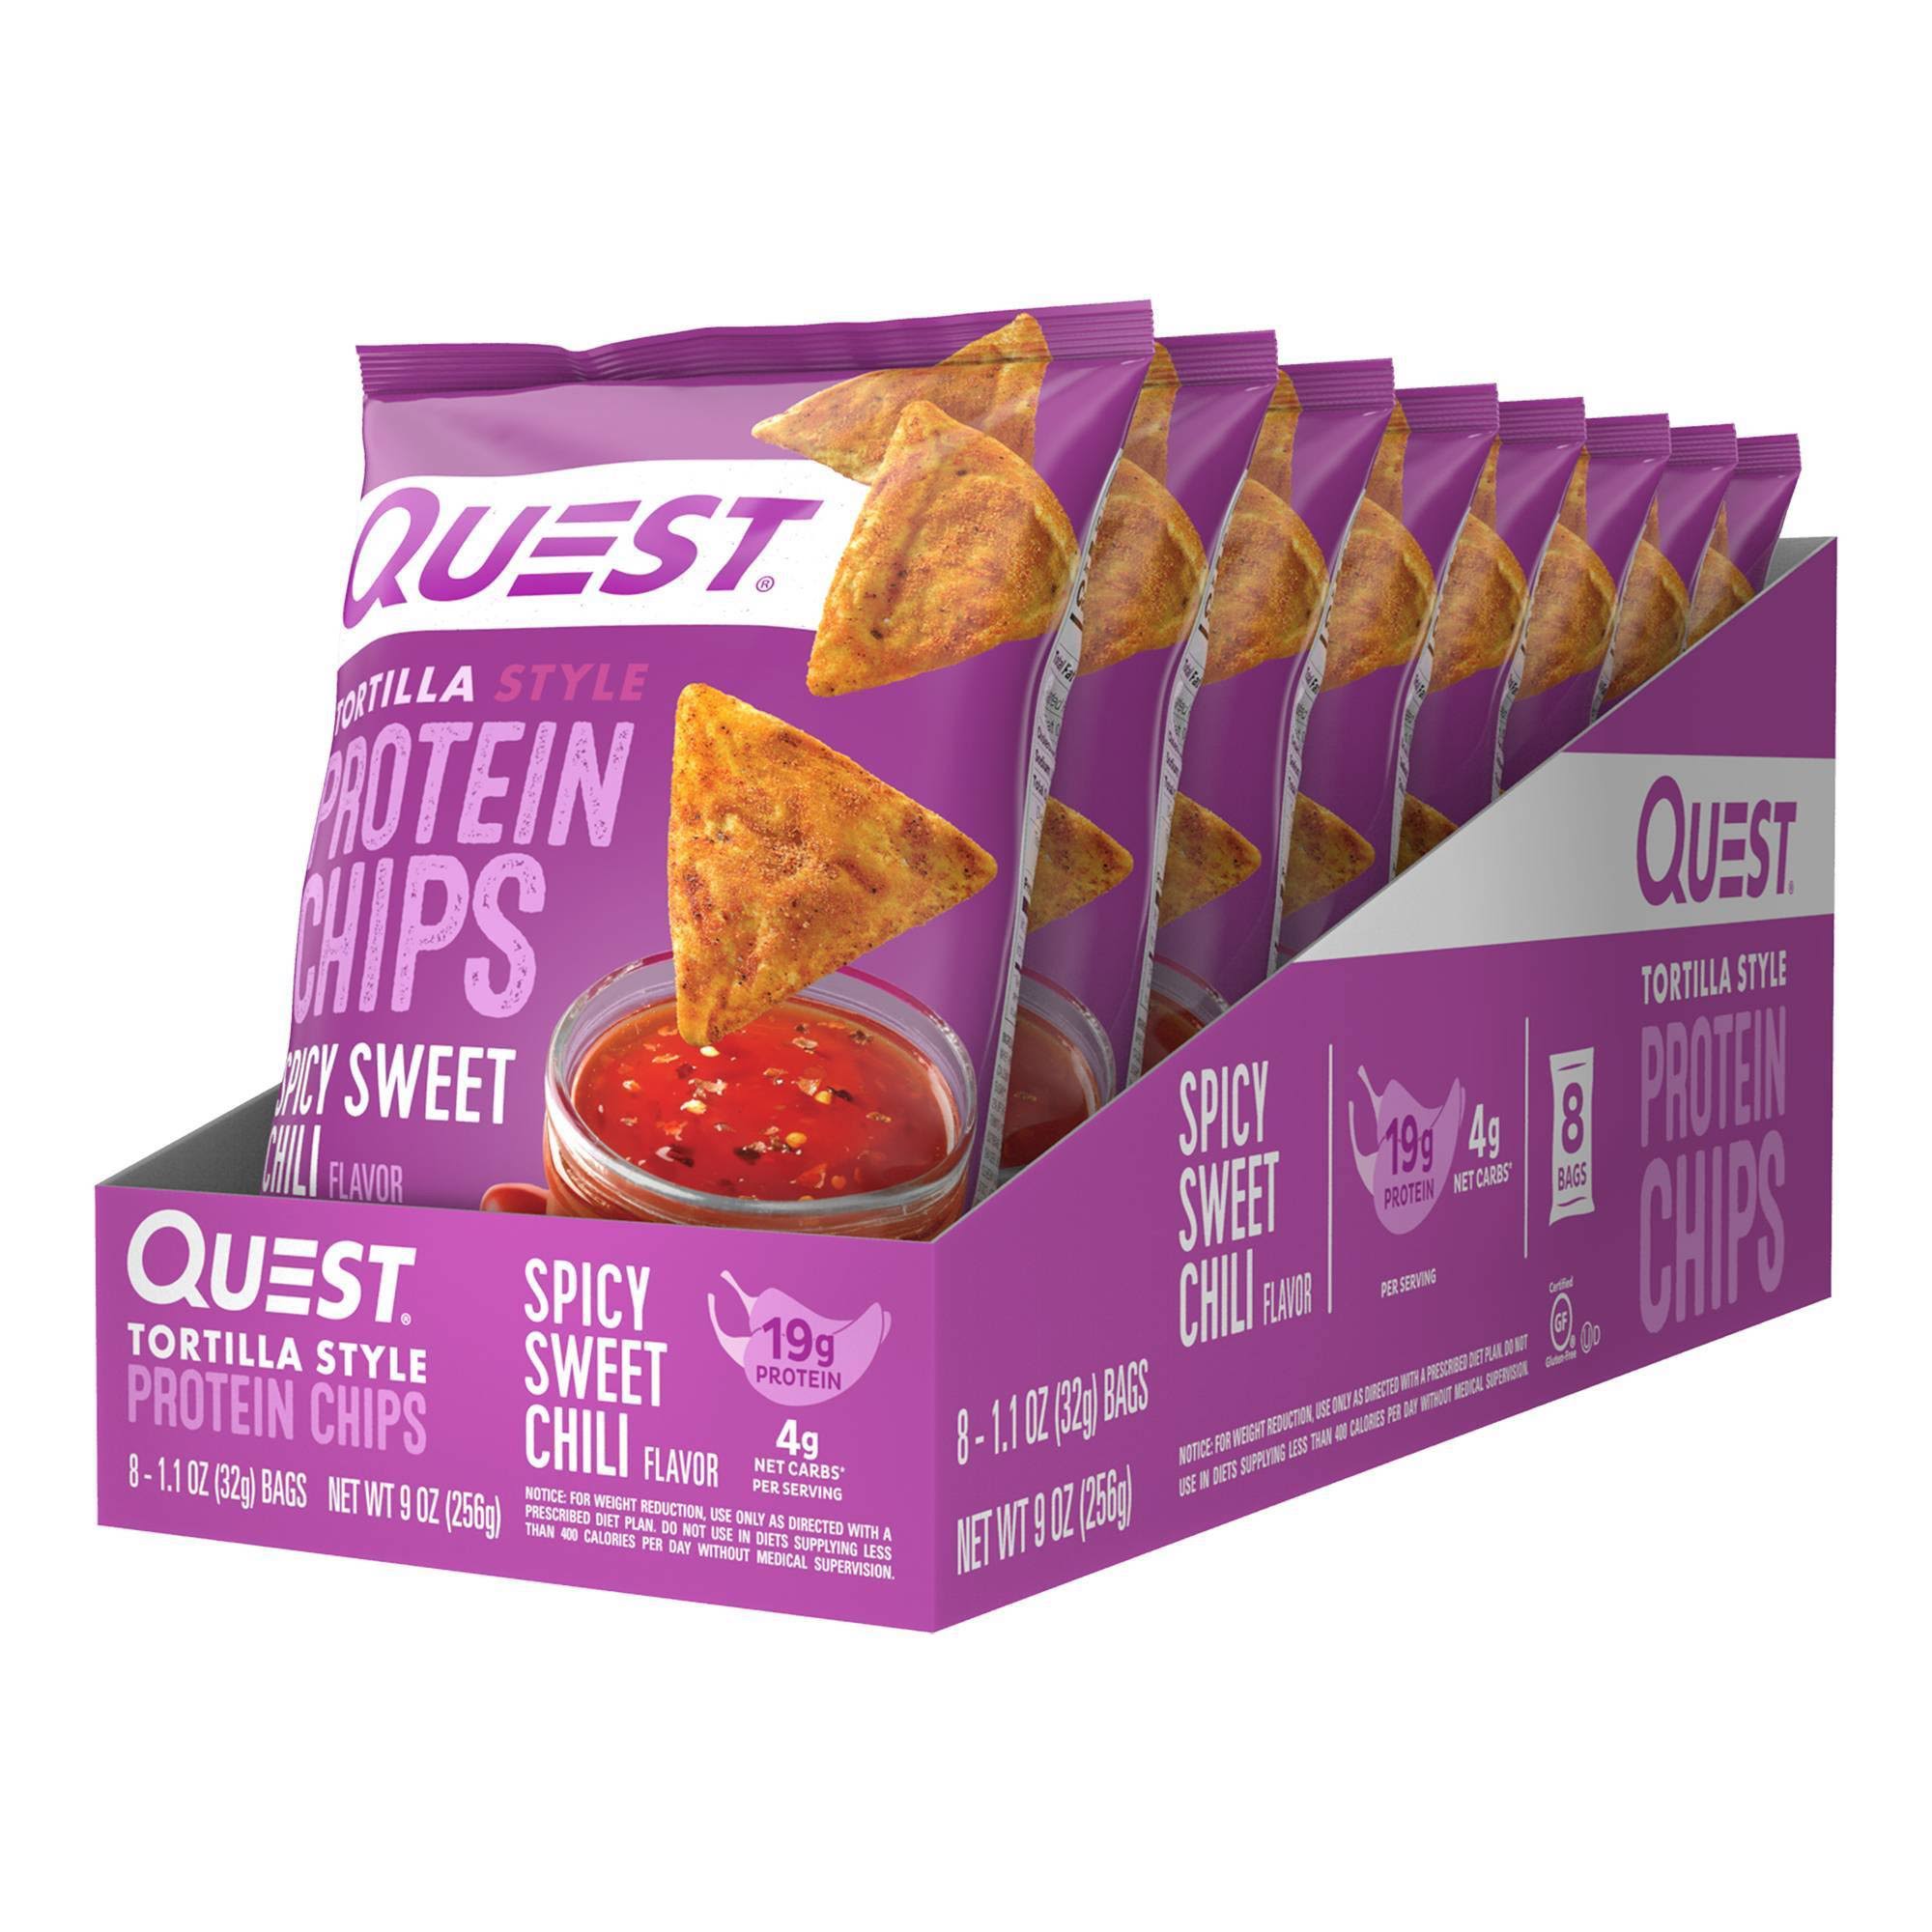 Quest Protein Chips, Tortilla Style, Spicy Sweet Chili - 8 pack, 1.1 oz bags